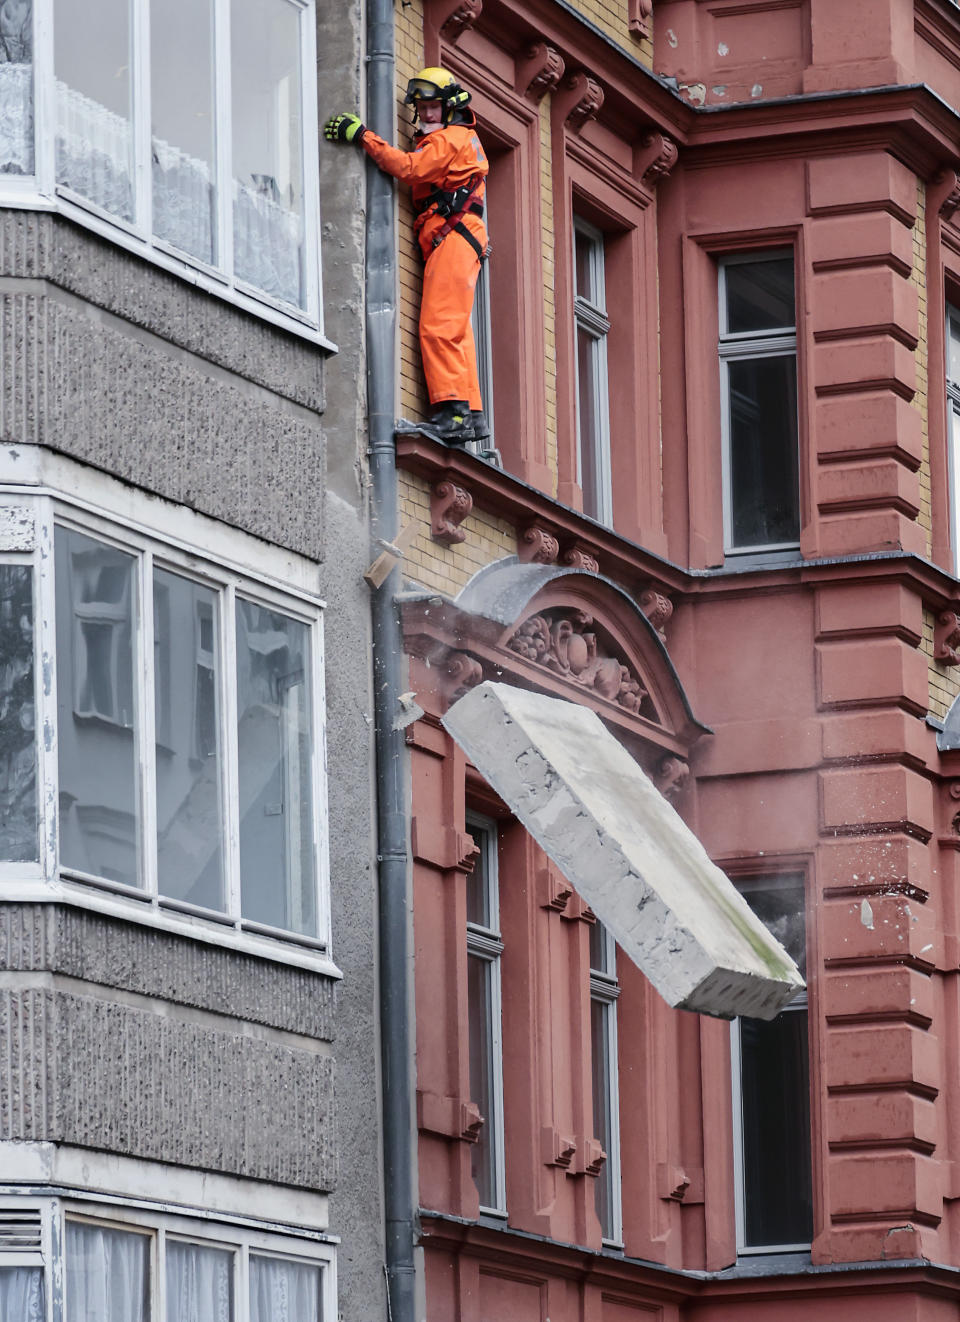 A workman loosens part of a wall damaged in a storm to crash onto the pavement below, in Berlin, Germany, Thursday, Feb. 17, 2022. Meteorologists warned Thursday that northern Europe could be battered by a series of storms over the coming days after strong winds swept across the region overnight. (AP Photo/Hannibal Hanschke)